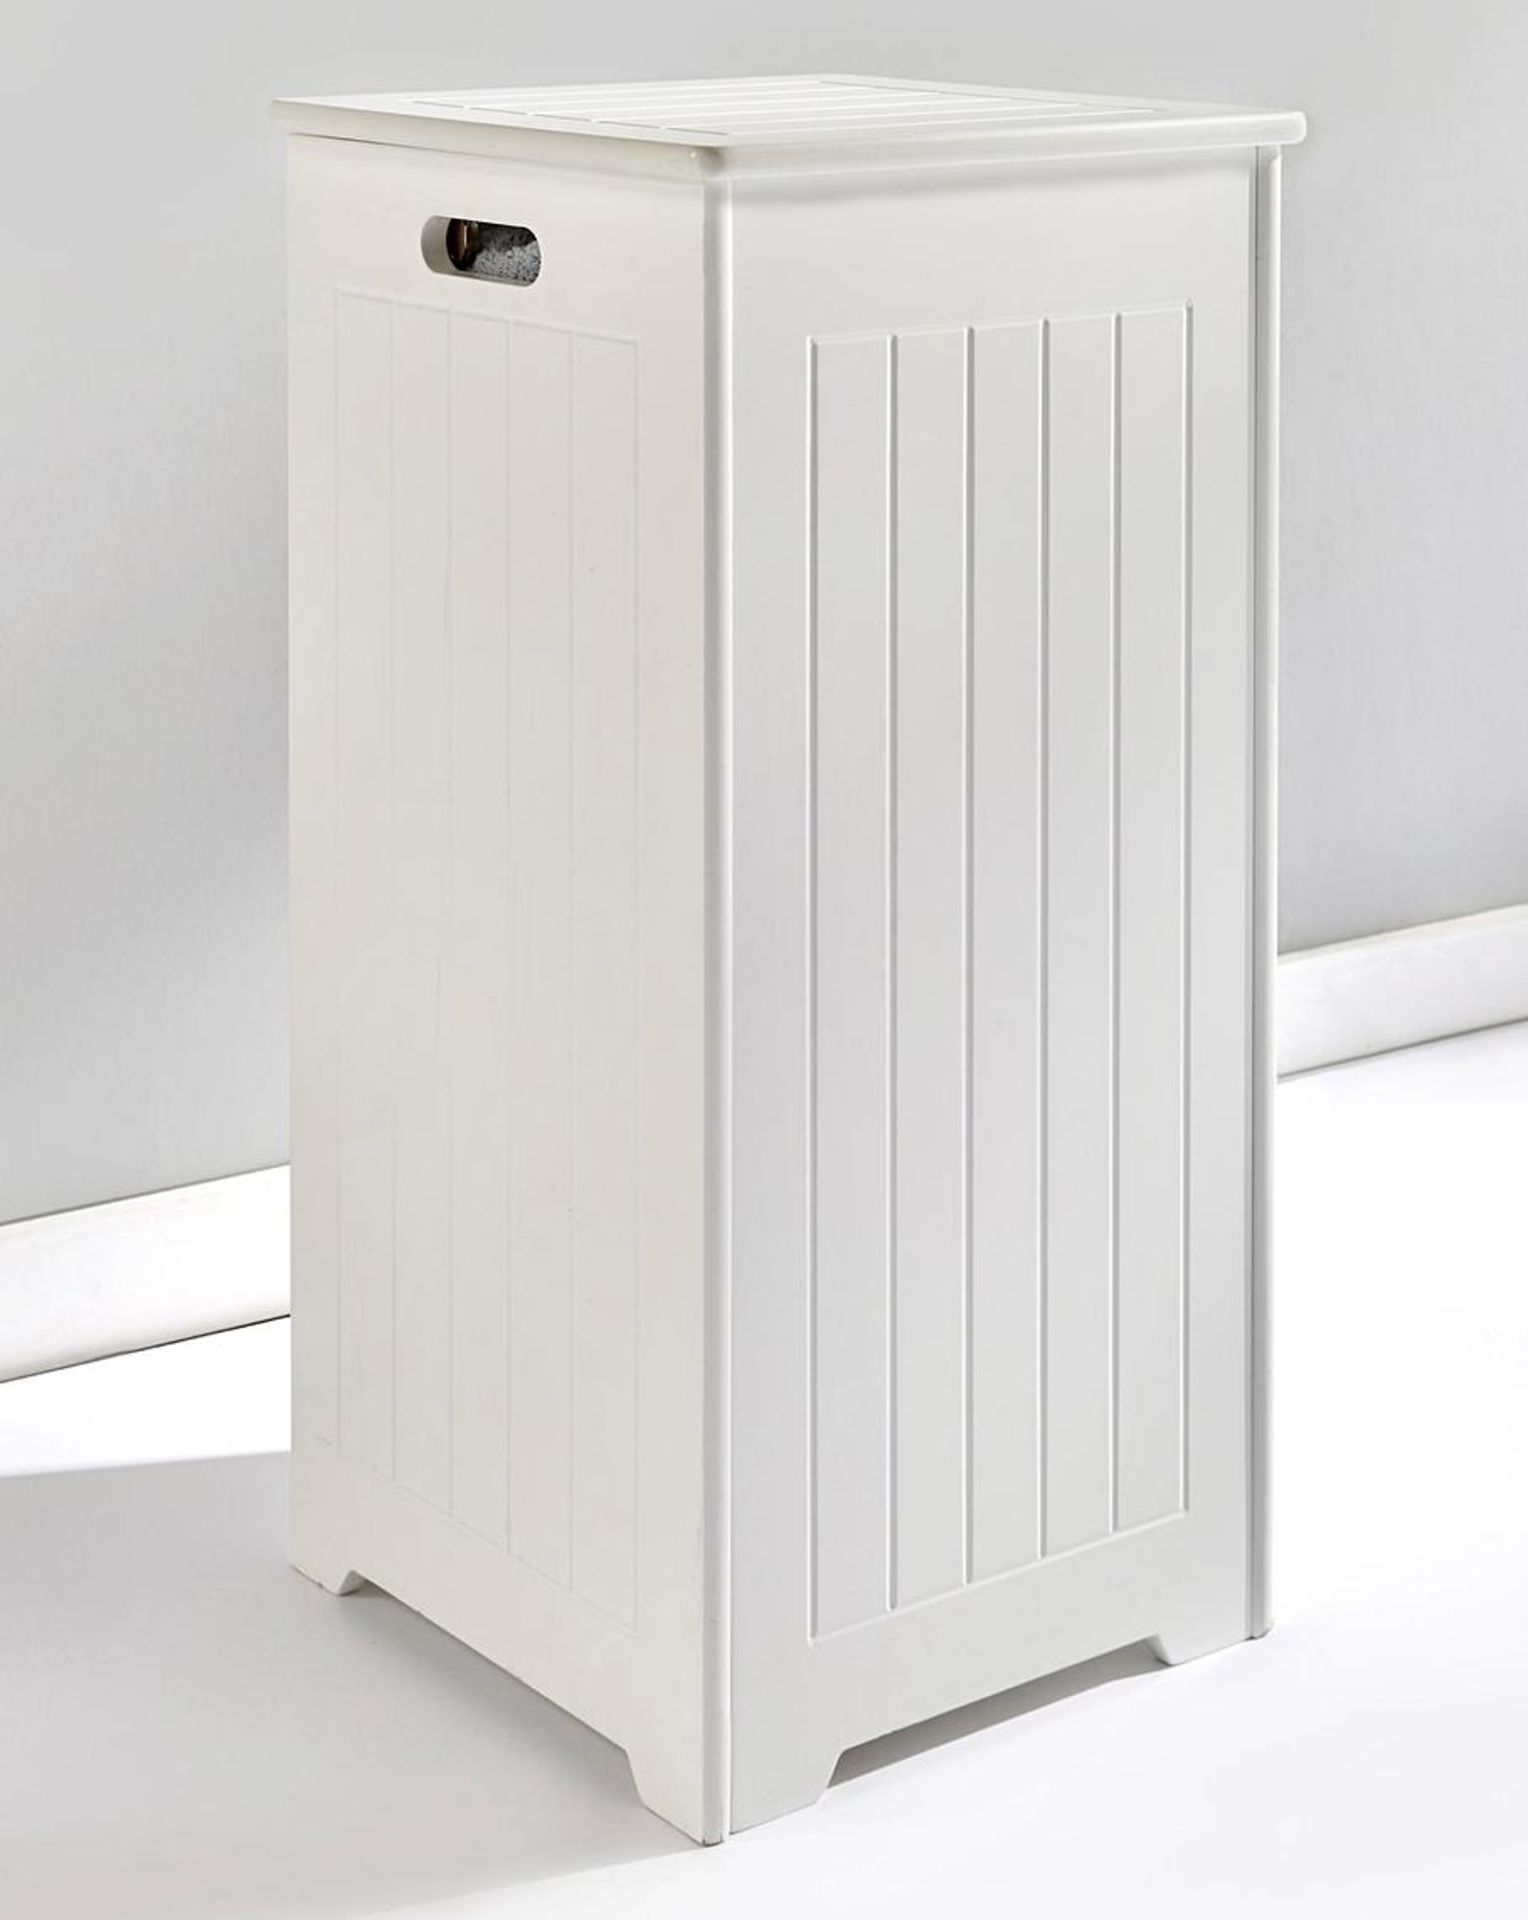 New England Slimline Laundry Hamper. Clean, pretty and boasting a gorgeous country style, this